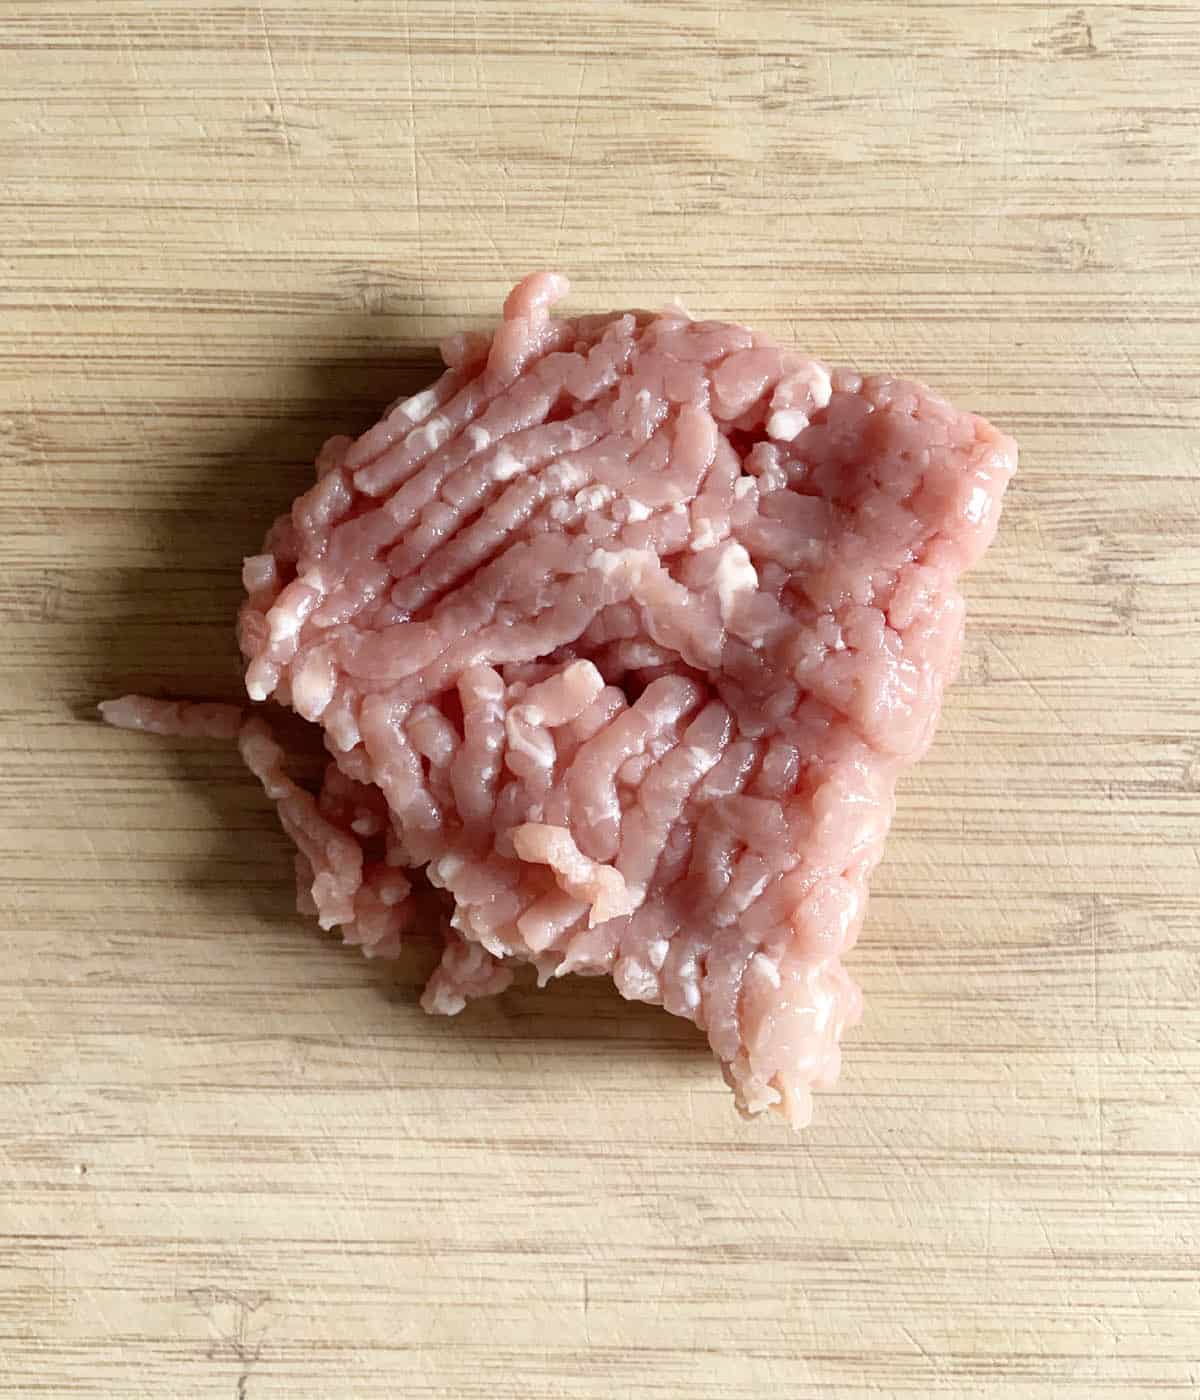 Raw pink ground pork meat on a wooden cutting board.